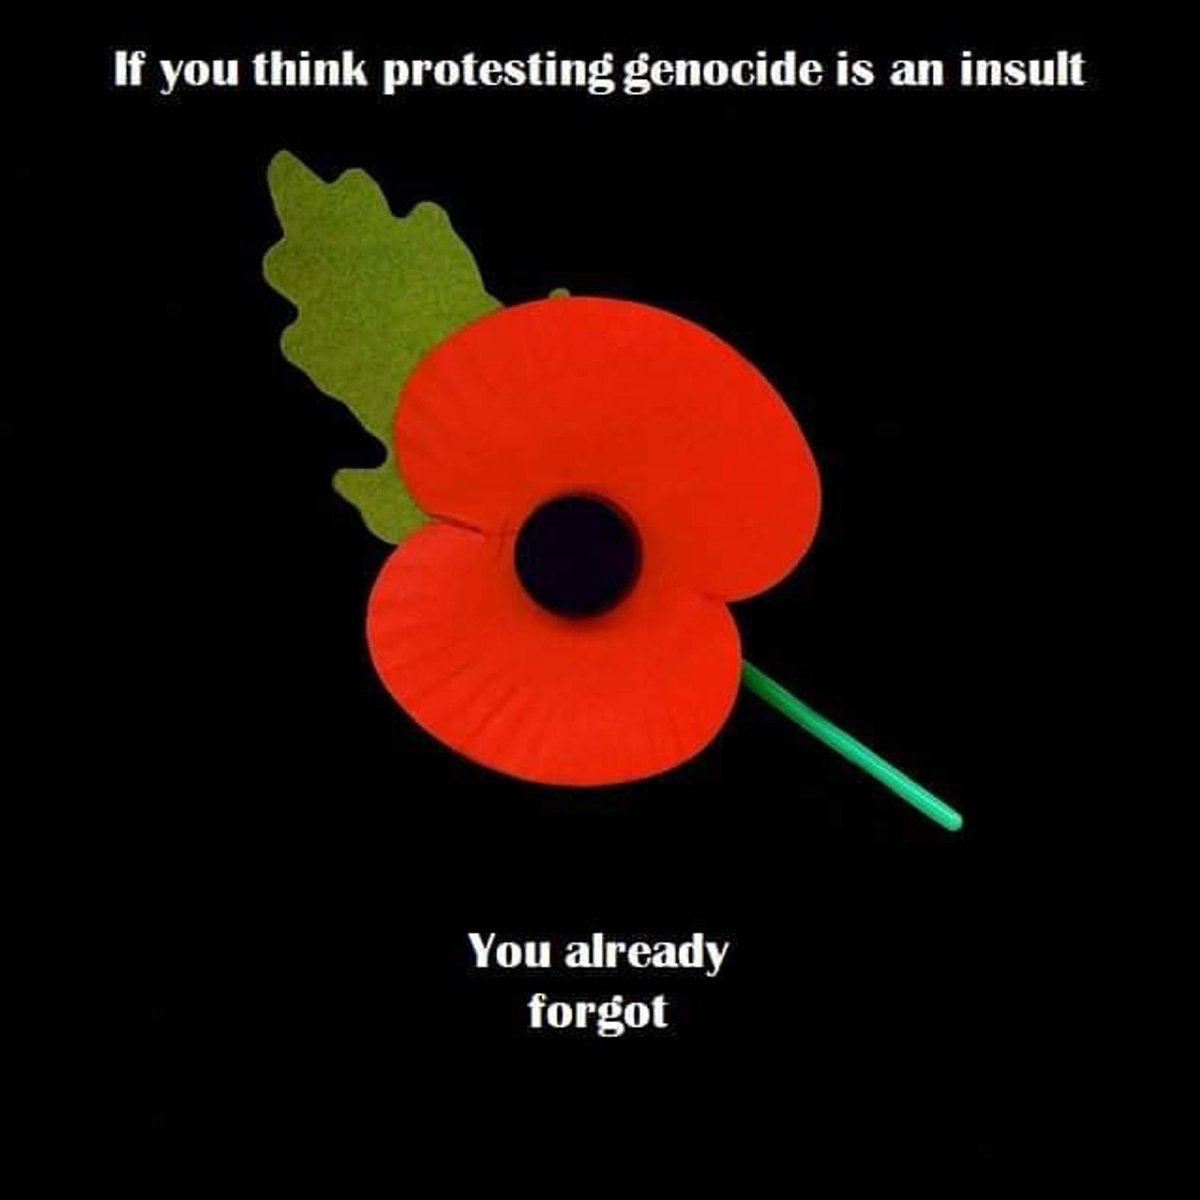 To those anti-protesters, those “lest we forget” and the ones stoking up the hatred…

#FreePalaestine #ArmistaceDay #Armistice #CeasefireInGazaNOW